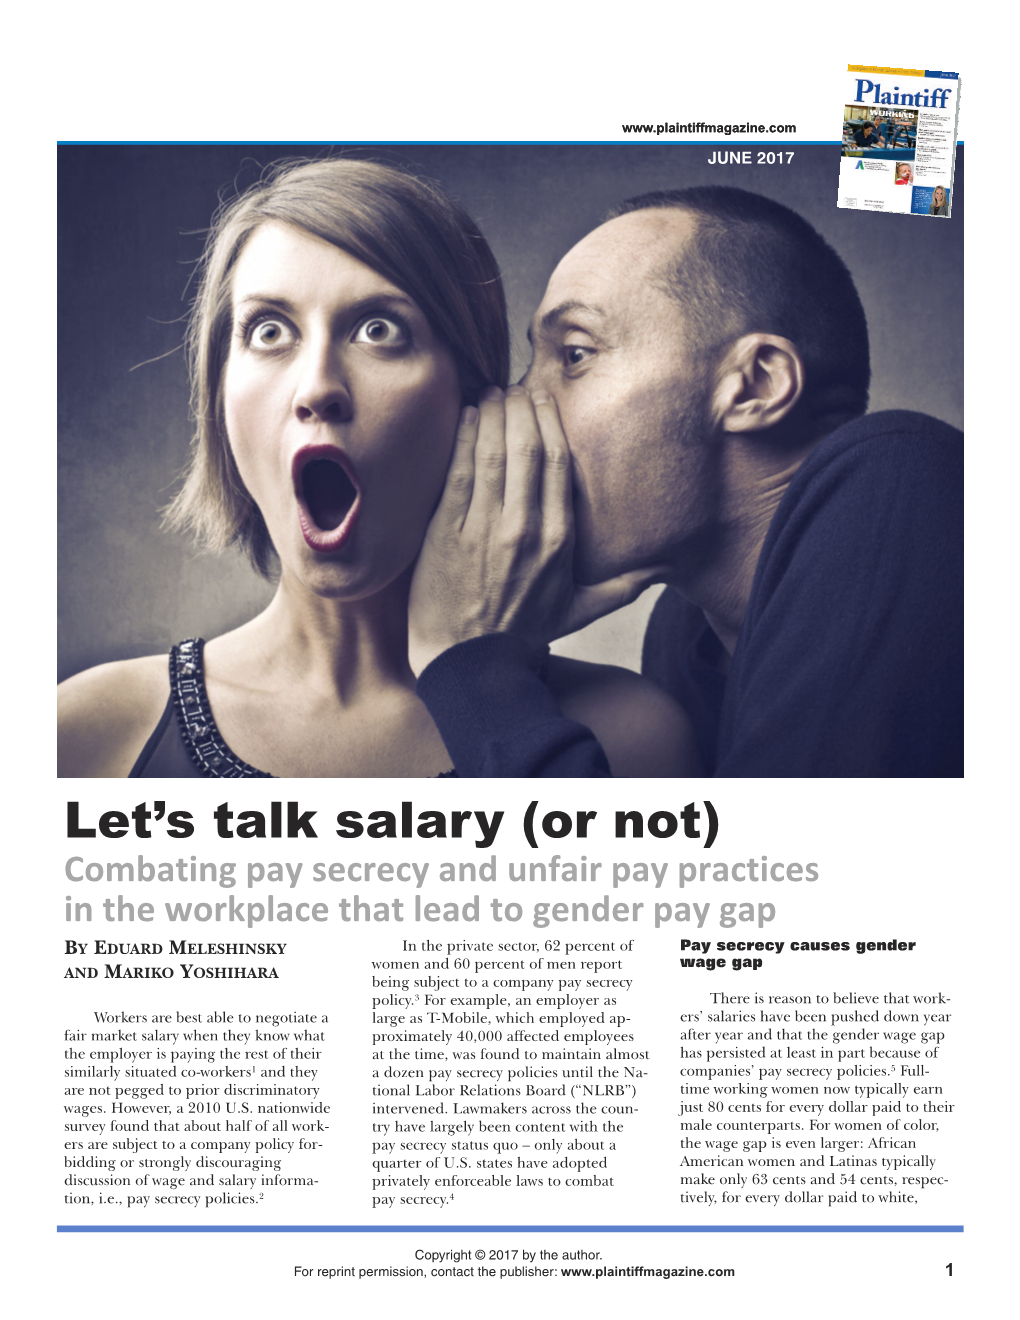 Let's Talk Salary (Or Not)